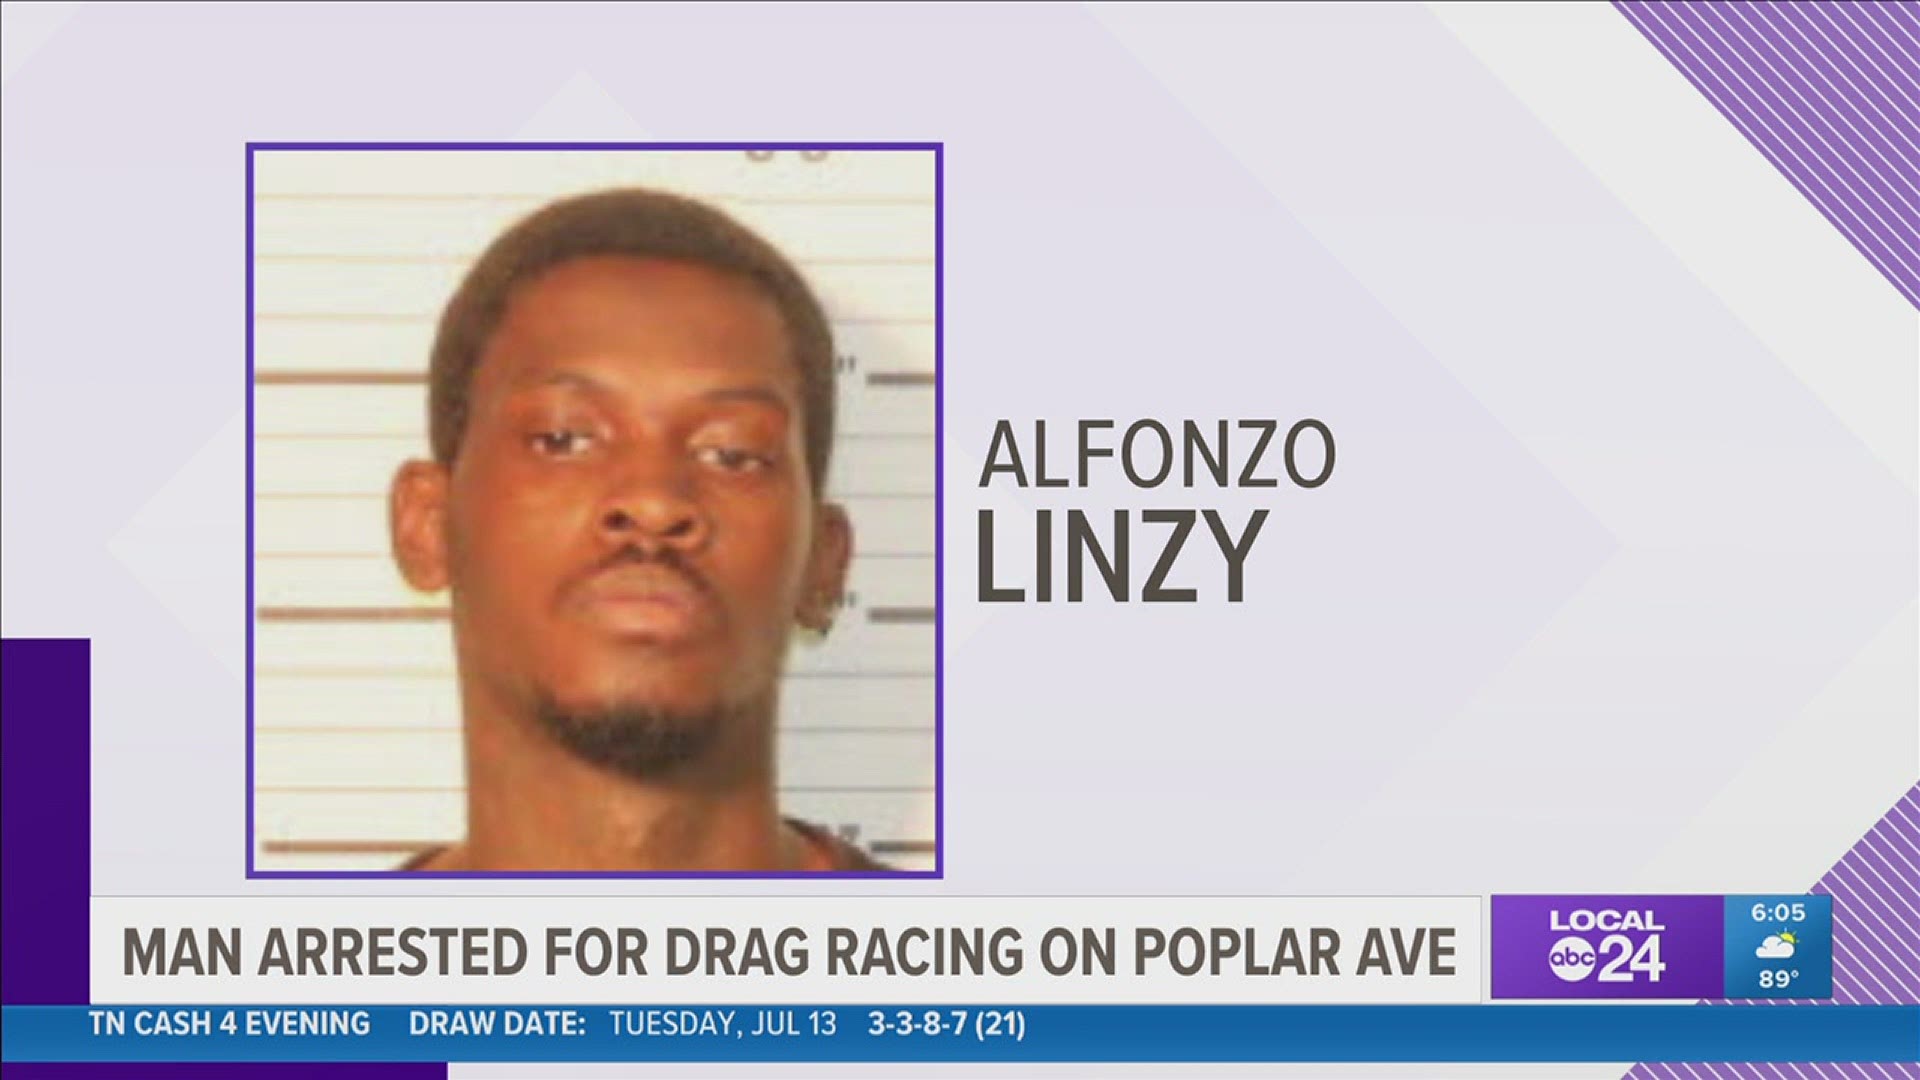 Alfonzo Linzy is charged with drag racing and reckless driving.